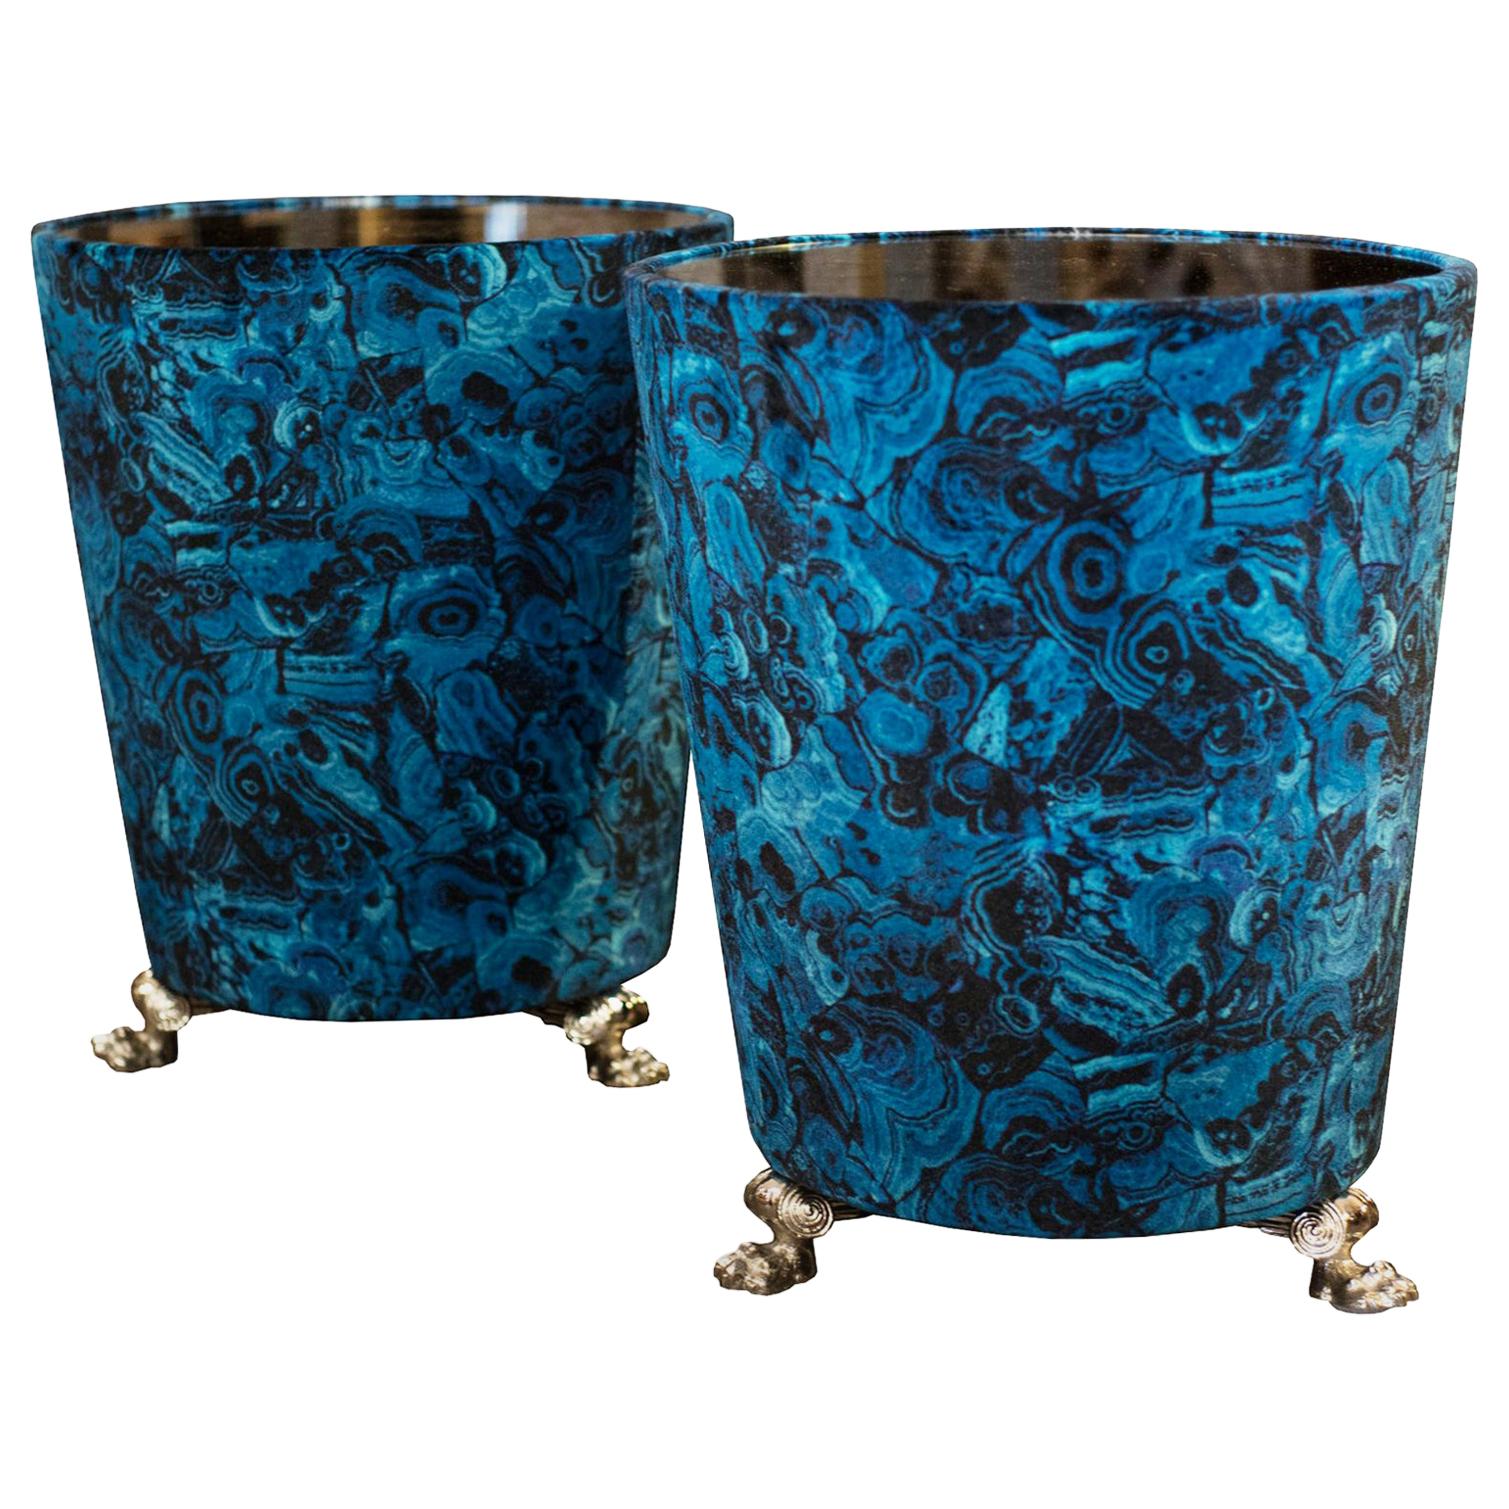 Pair of Studio Maison Nurita Blue Agate Tables with Nickel Lion's Feet Legs For Sale